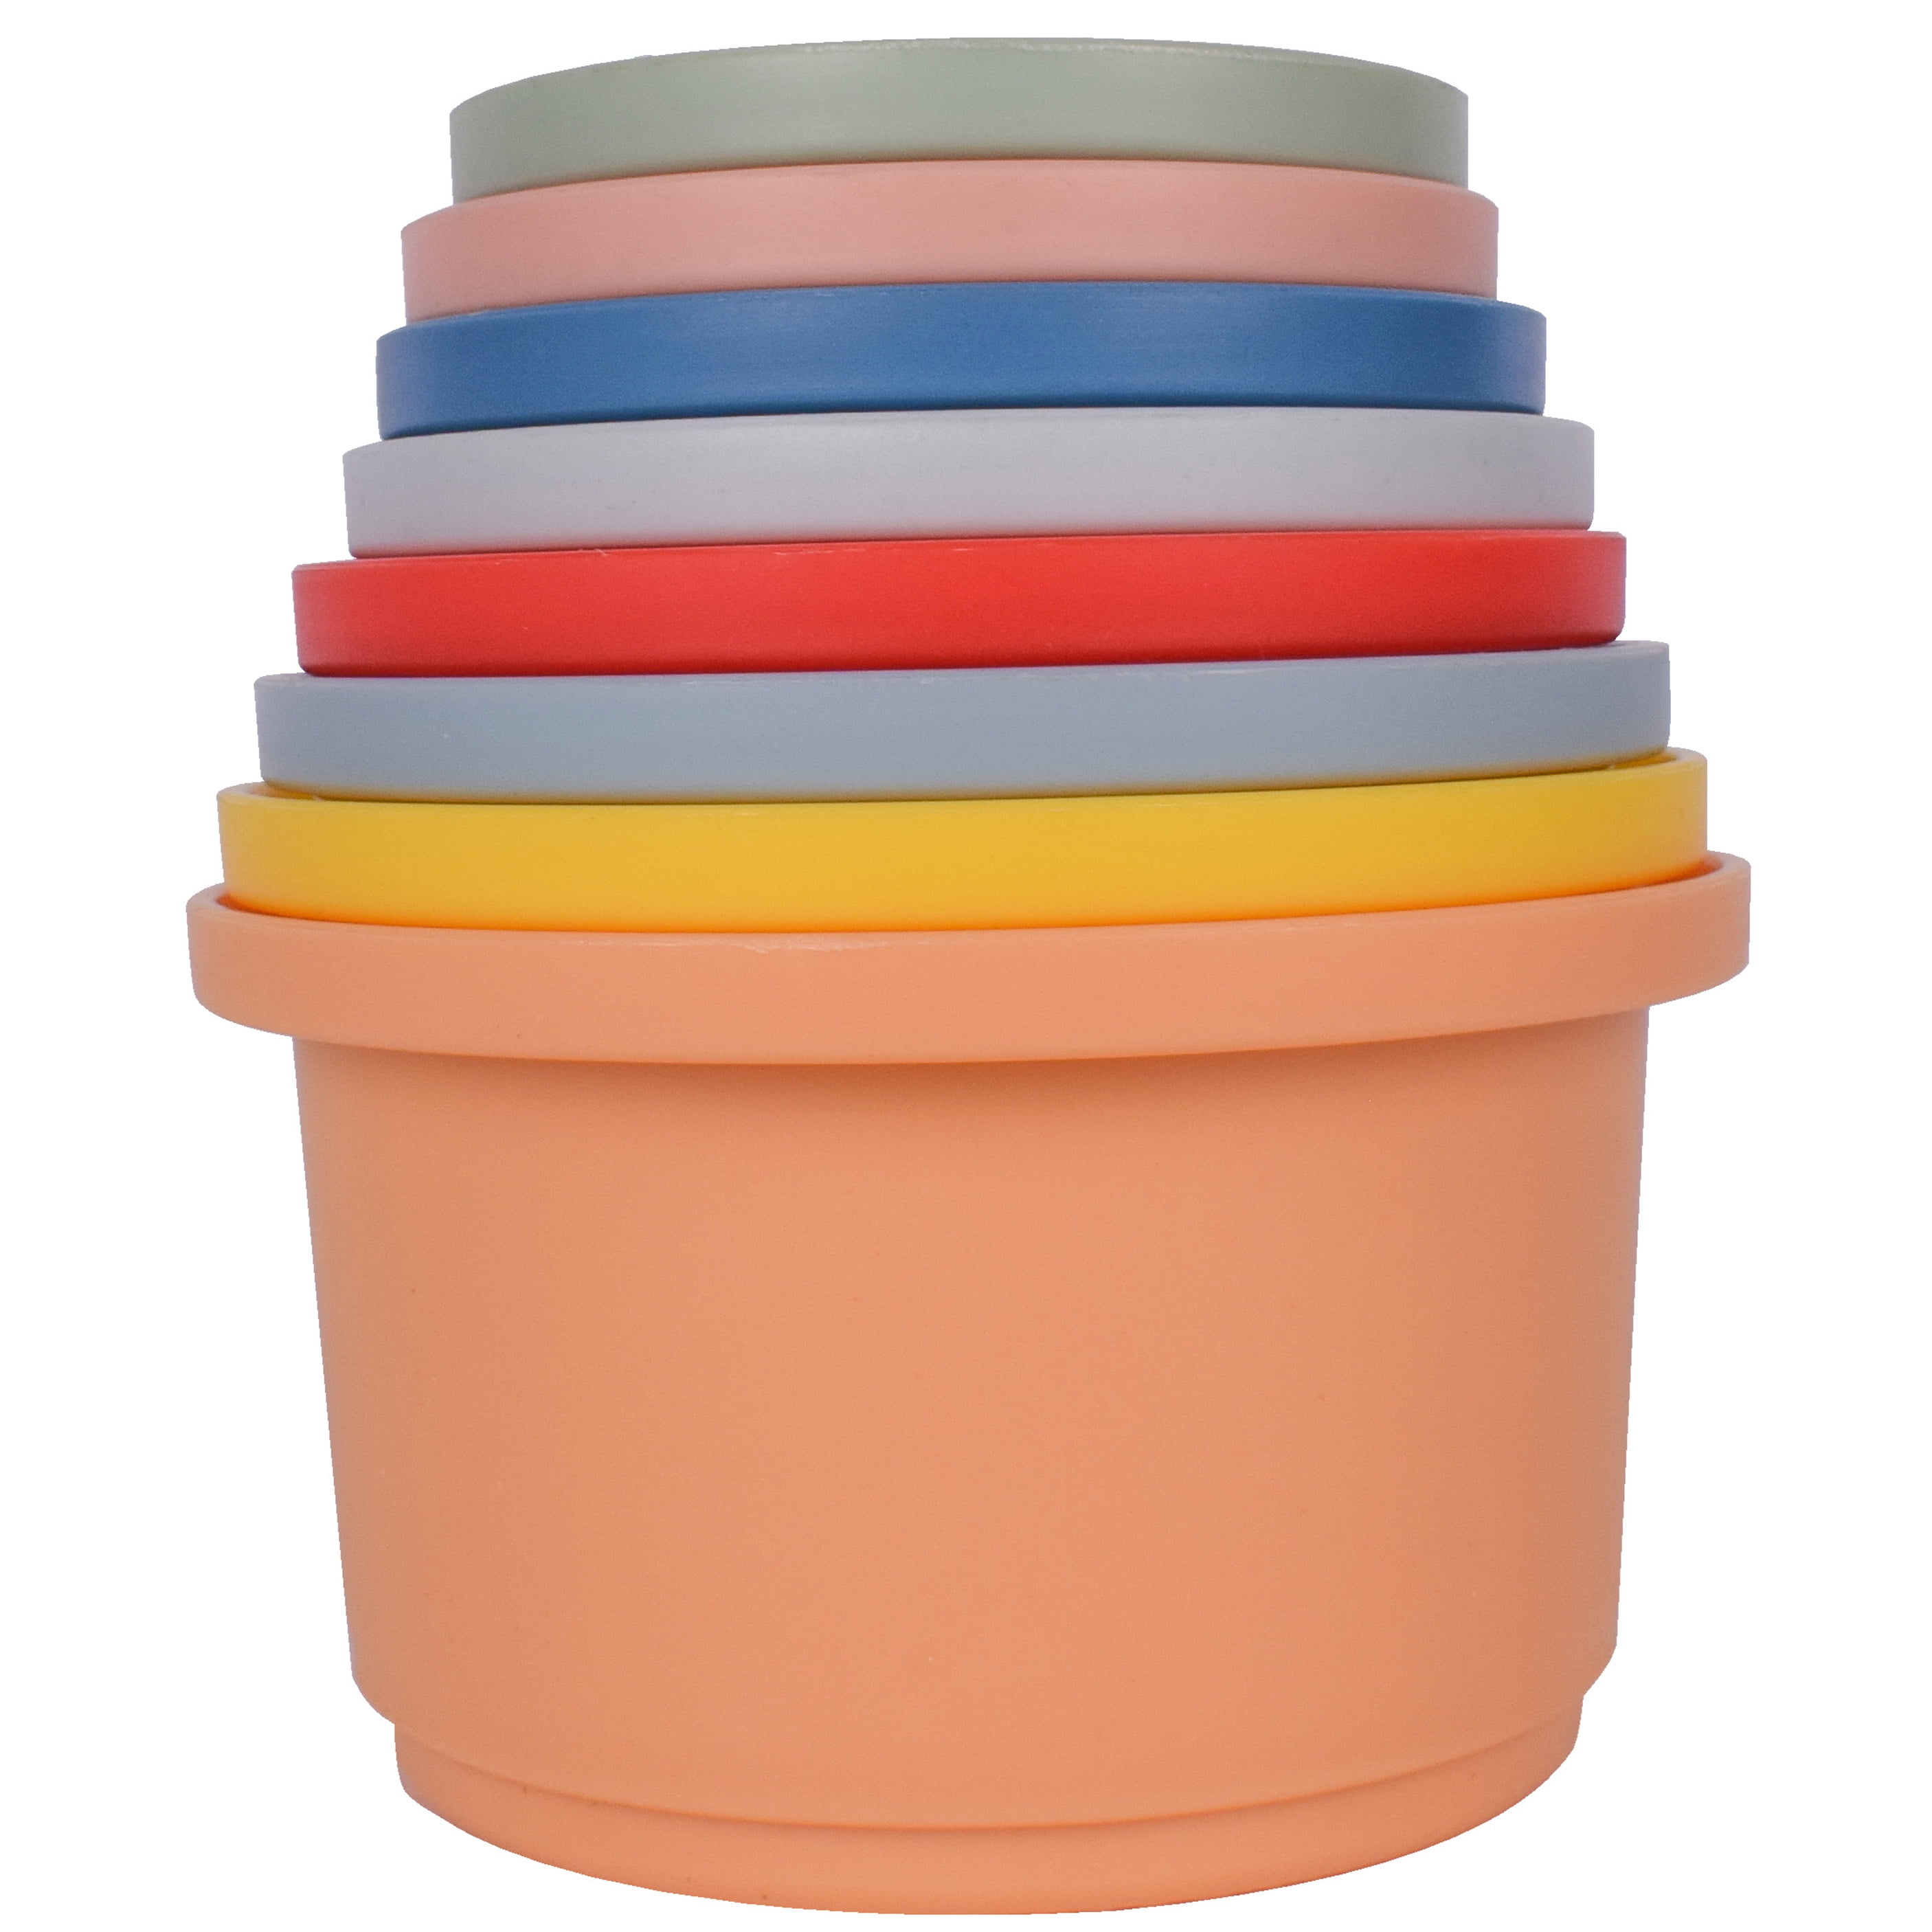 Hopscotch Lane 8 Pk Bath Stacking Cups, Plastic |Baby & Toddler 6+ Months, Unisex